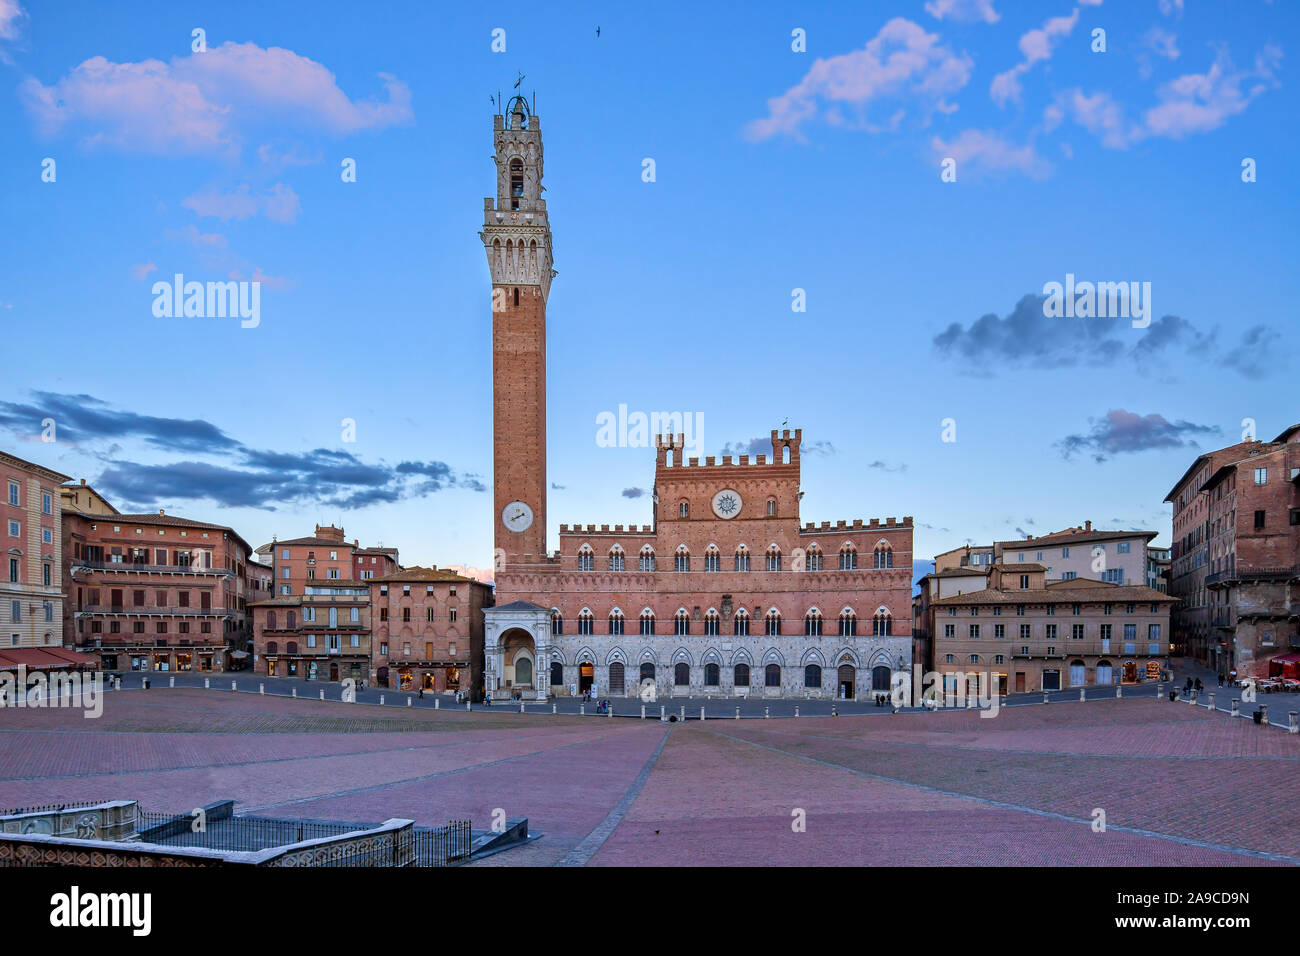 Panoramic view of the famous Piazza del Campo, Palazzo Pubblico and the Torre Del Mangia in Siena at sunset, Tuscany, Italy Stock Photo